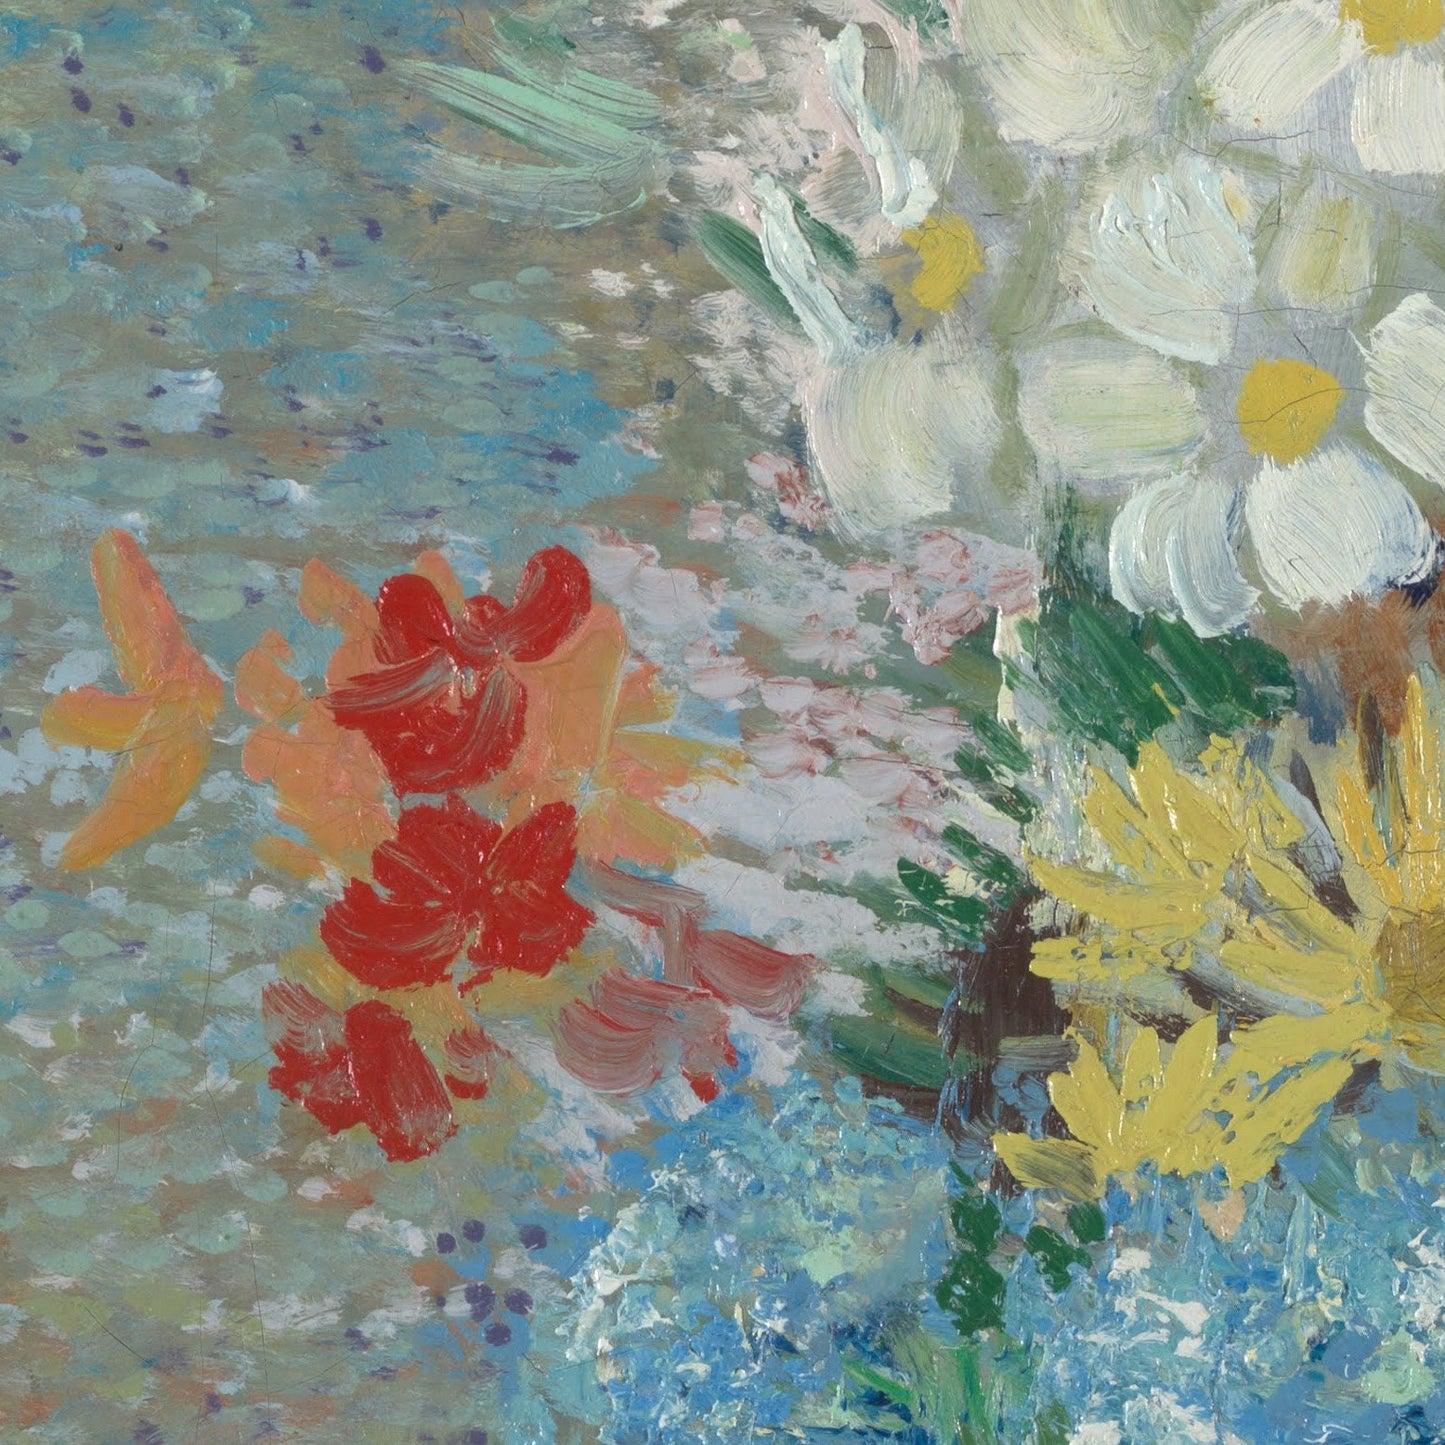 Flowers in a Blue Vase by Vincent Van Gogh, 3d Printed with texture and brush strokes looks like original oil-painting, code:419